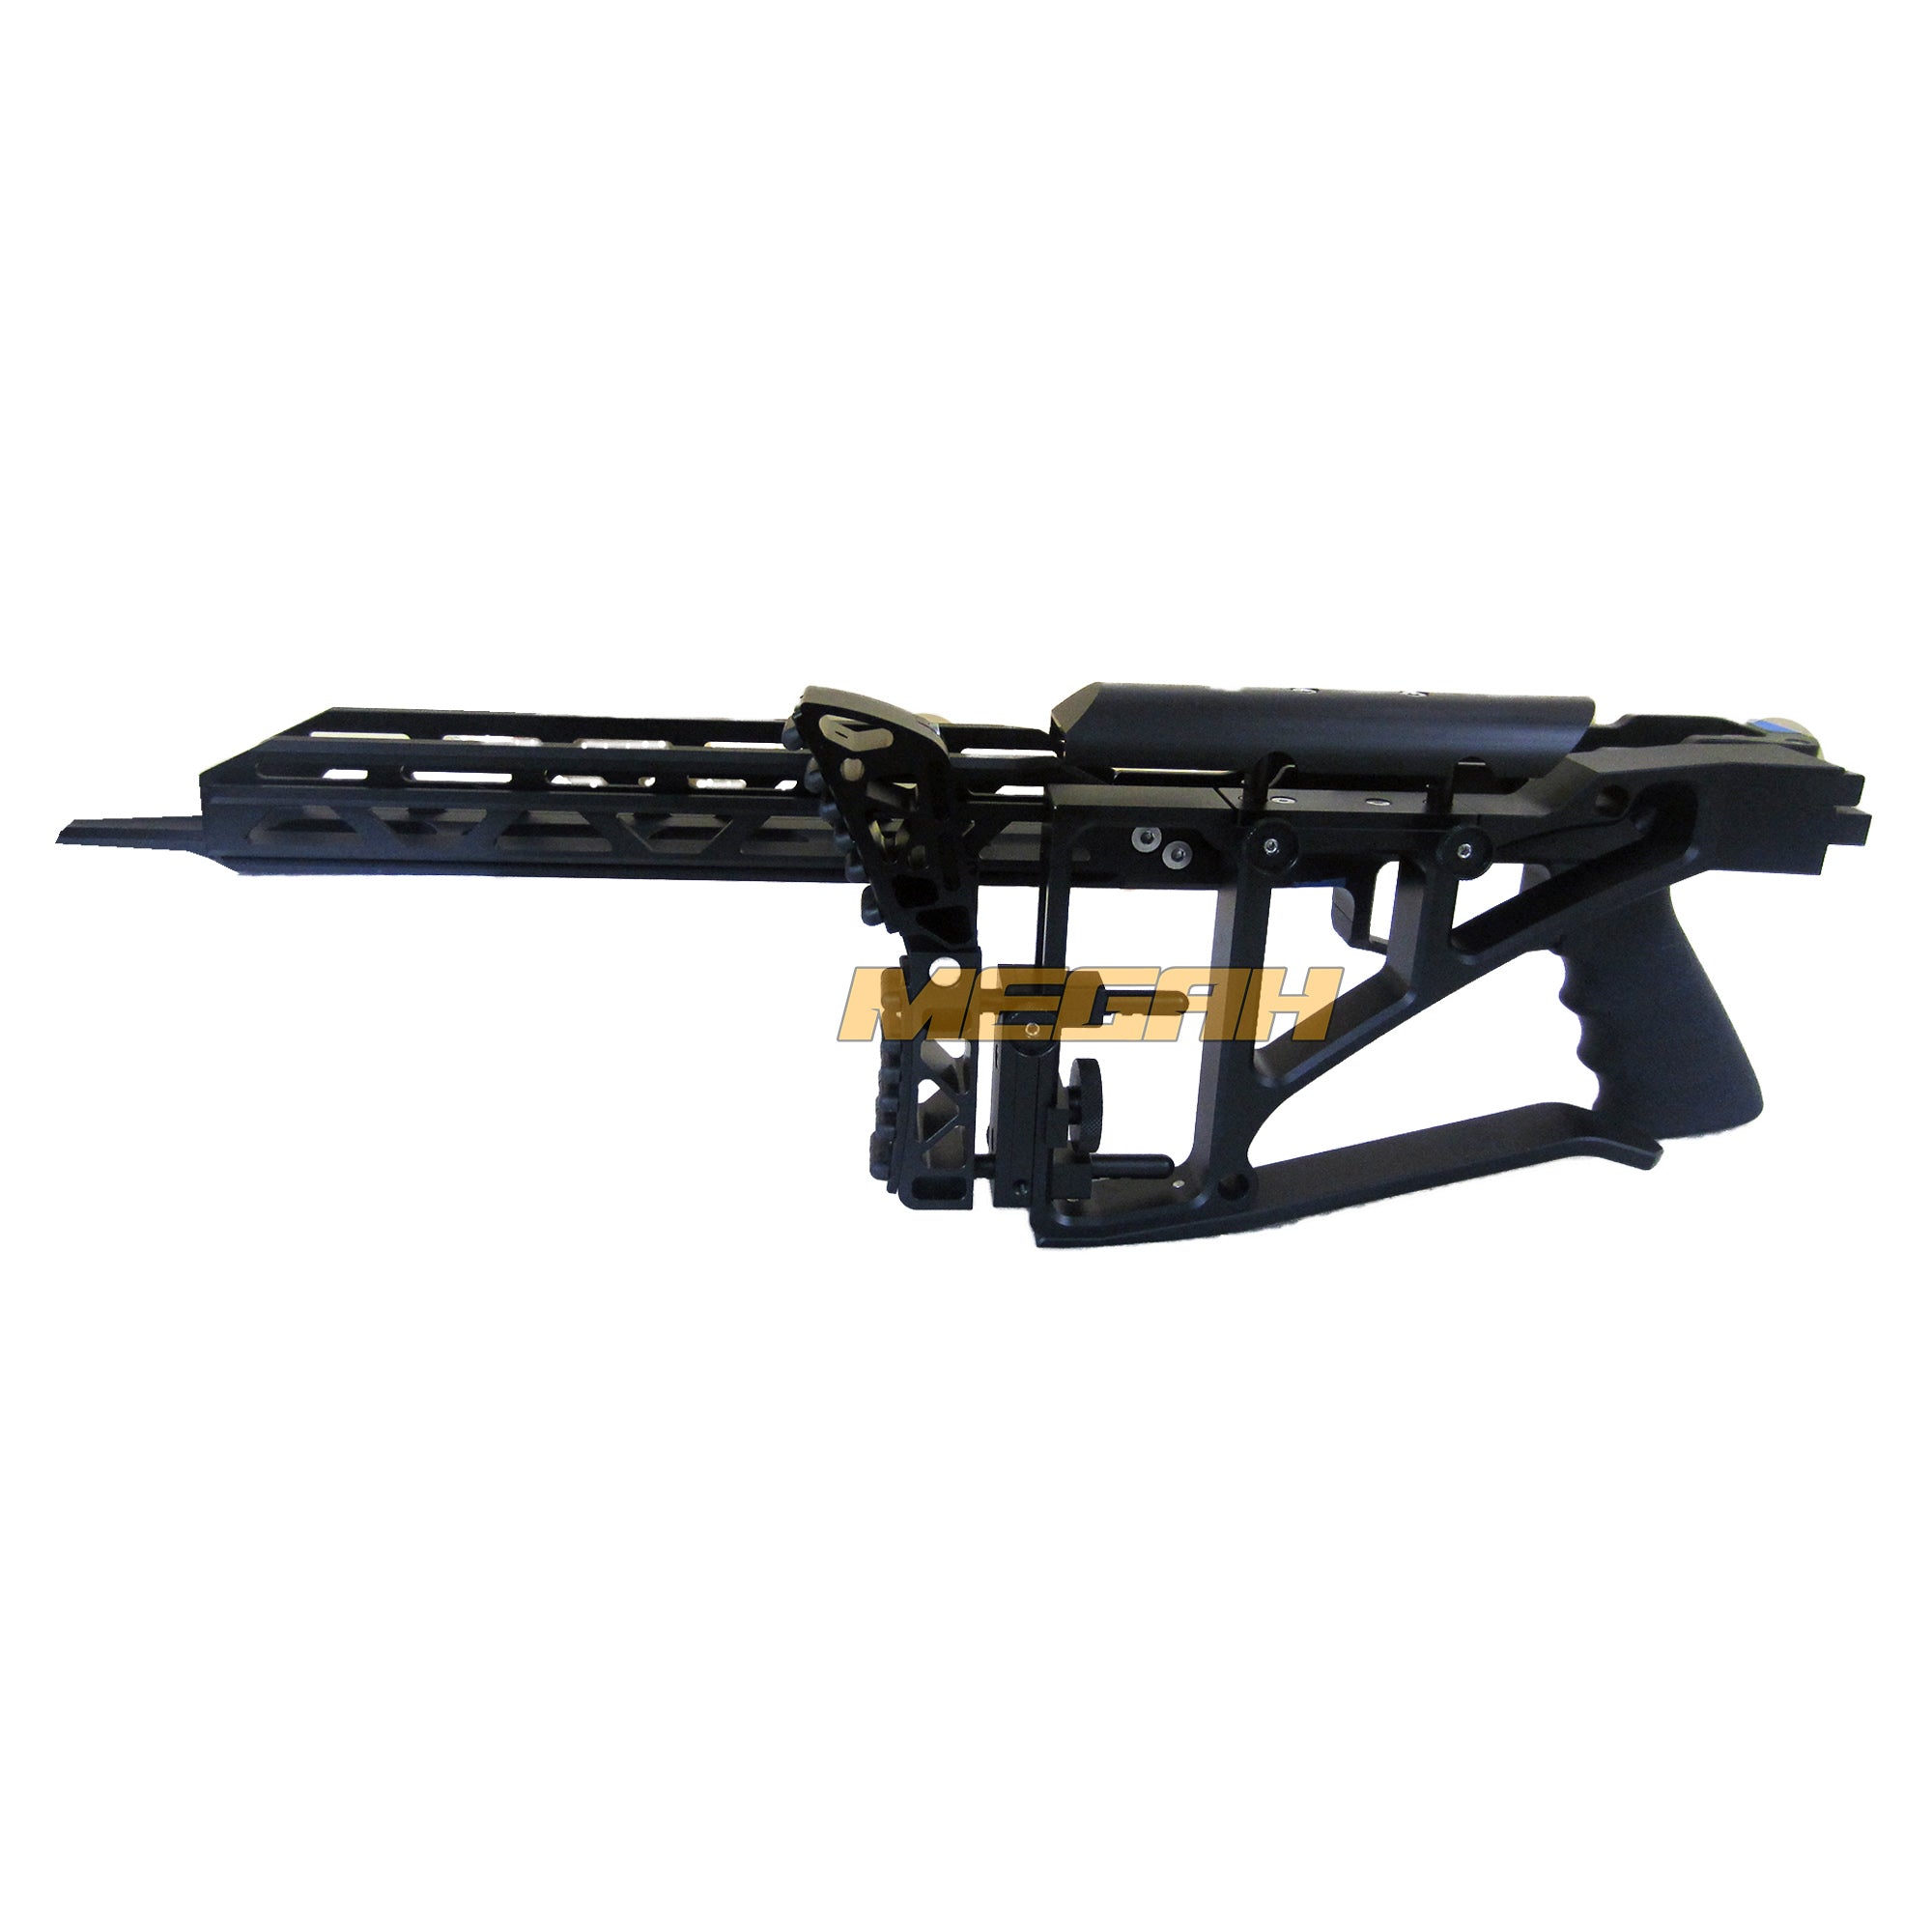 SABER TACTICAL CHASSIS DREAMLINE STD (AS739) - Megah Sport